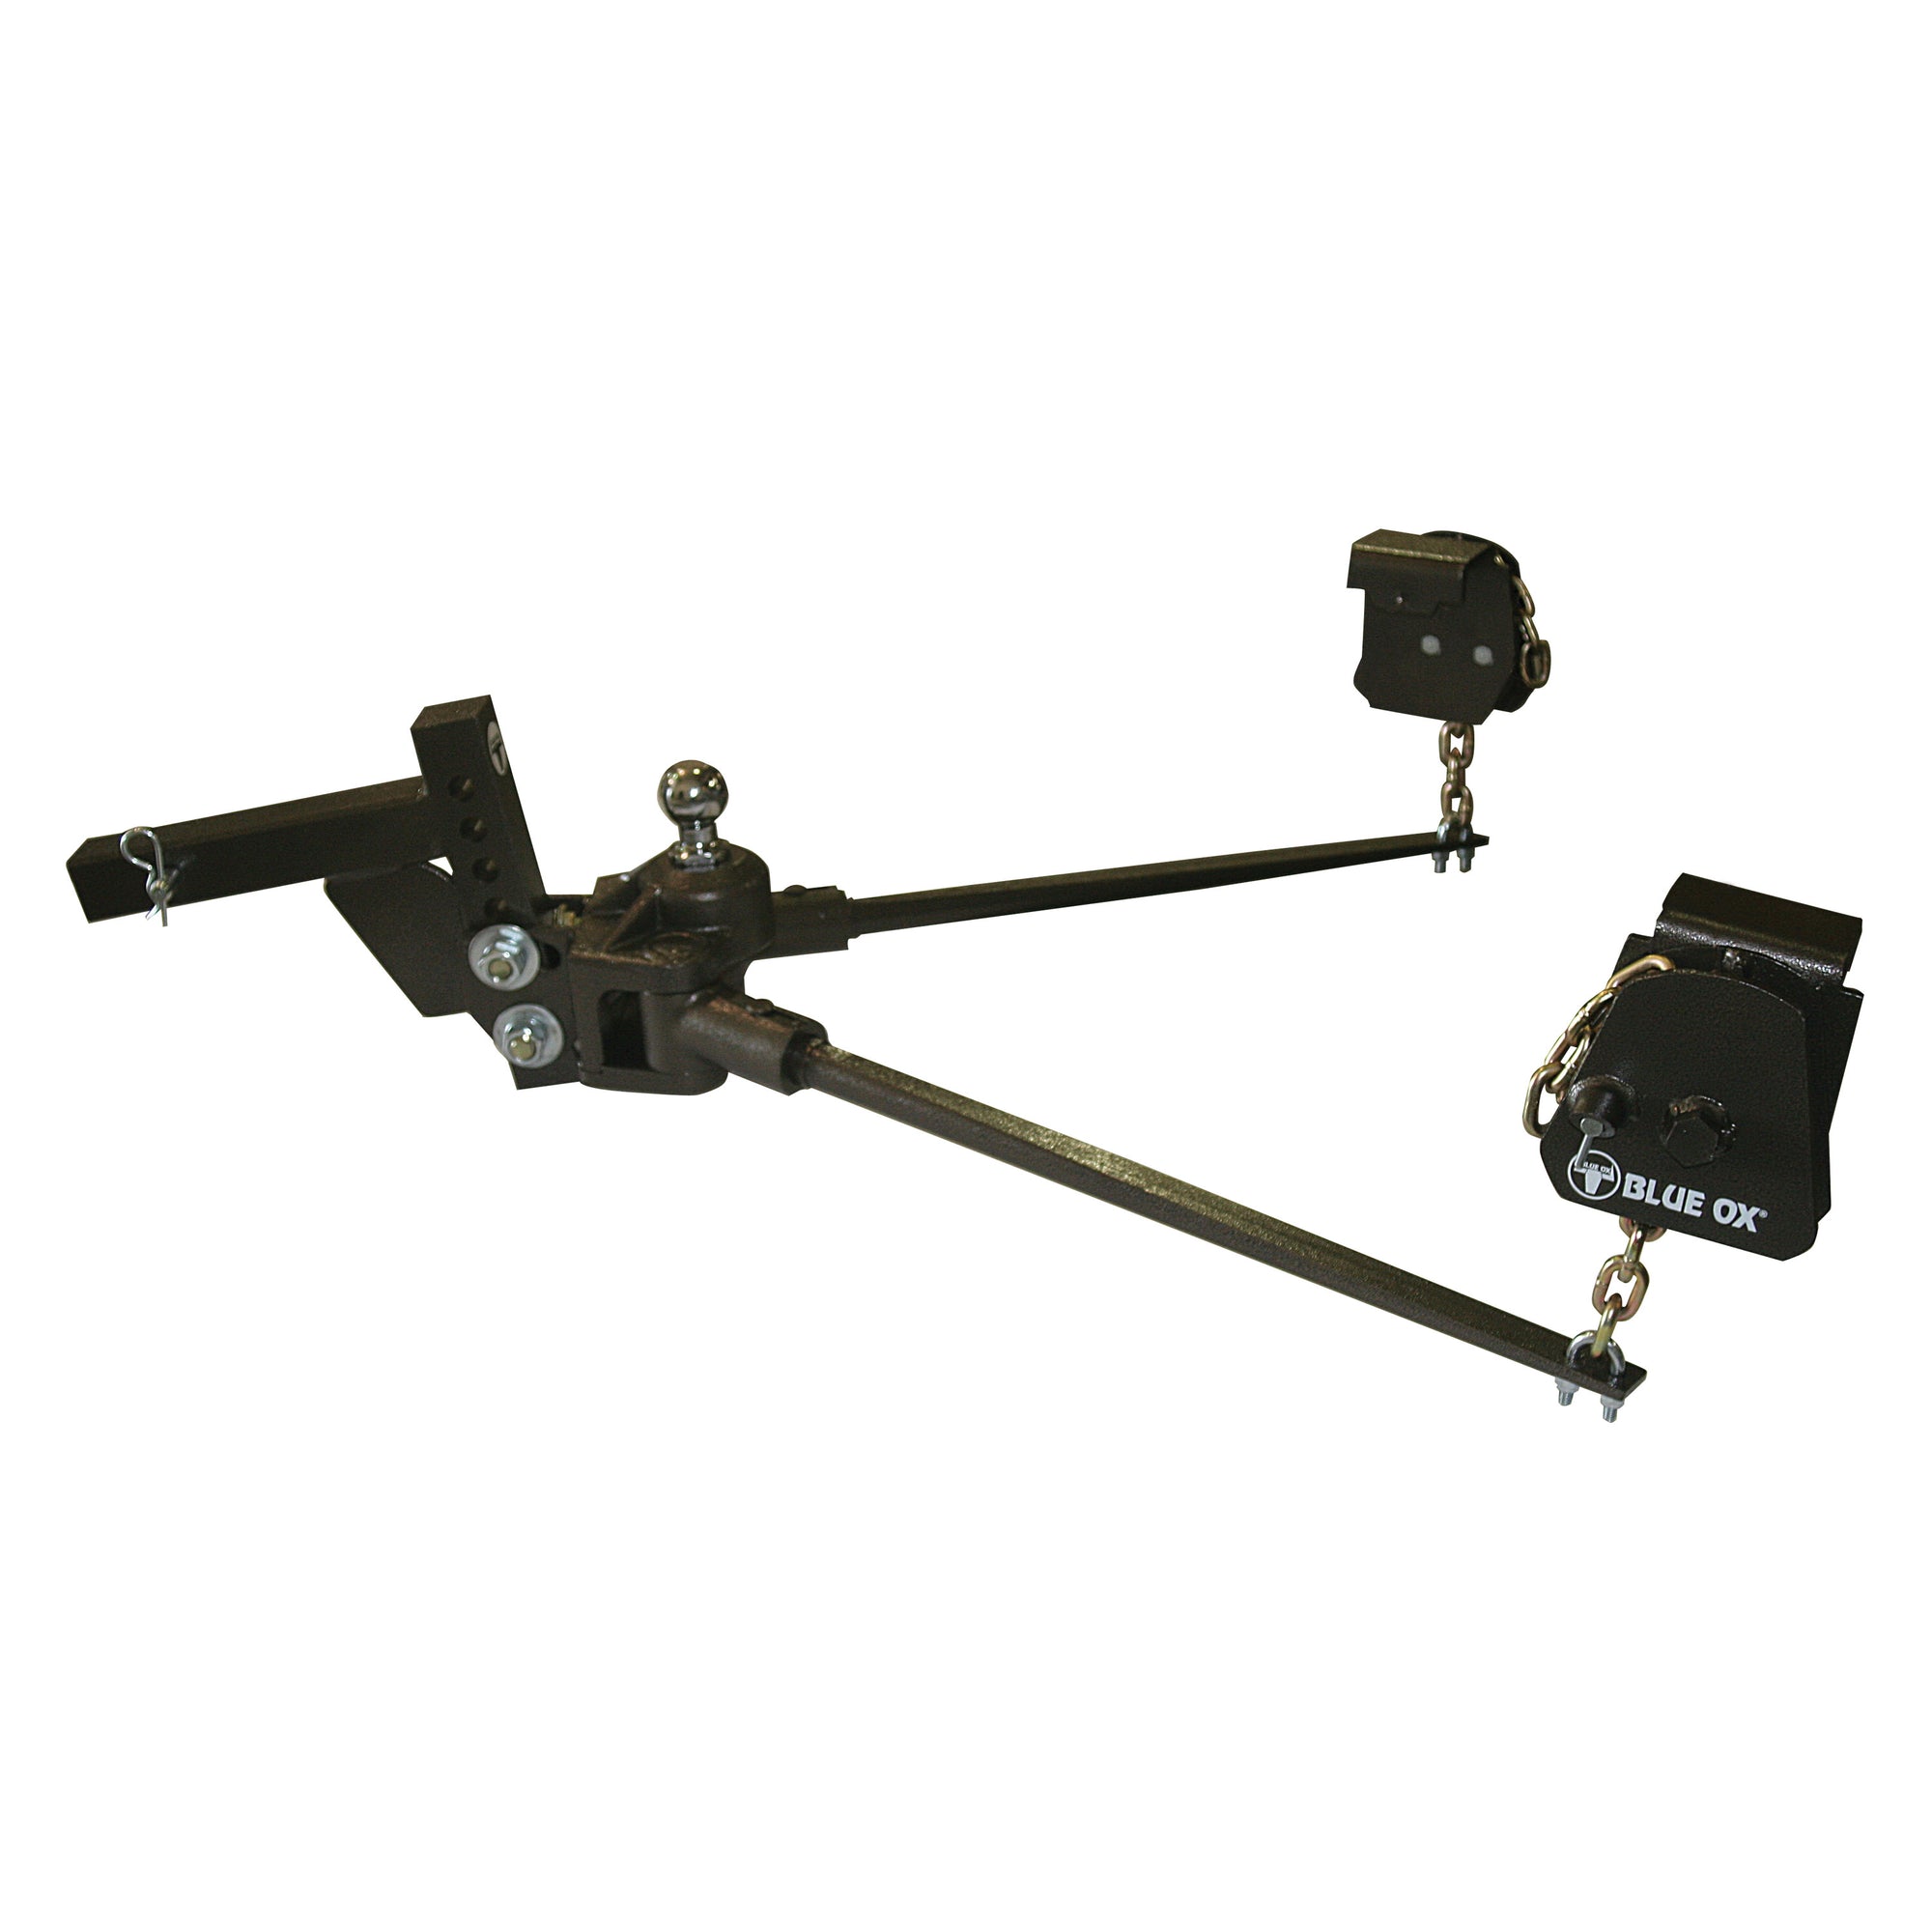 Blue Ox BXW0550 SwayPro Weight Distribution Hitch - 6,000 GTW/550 TW